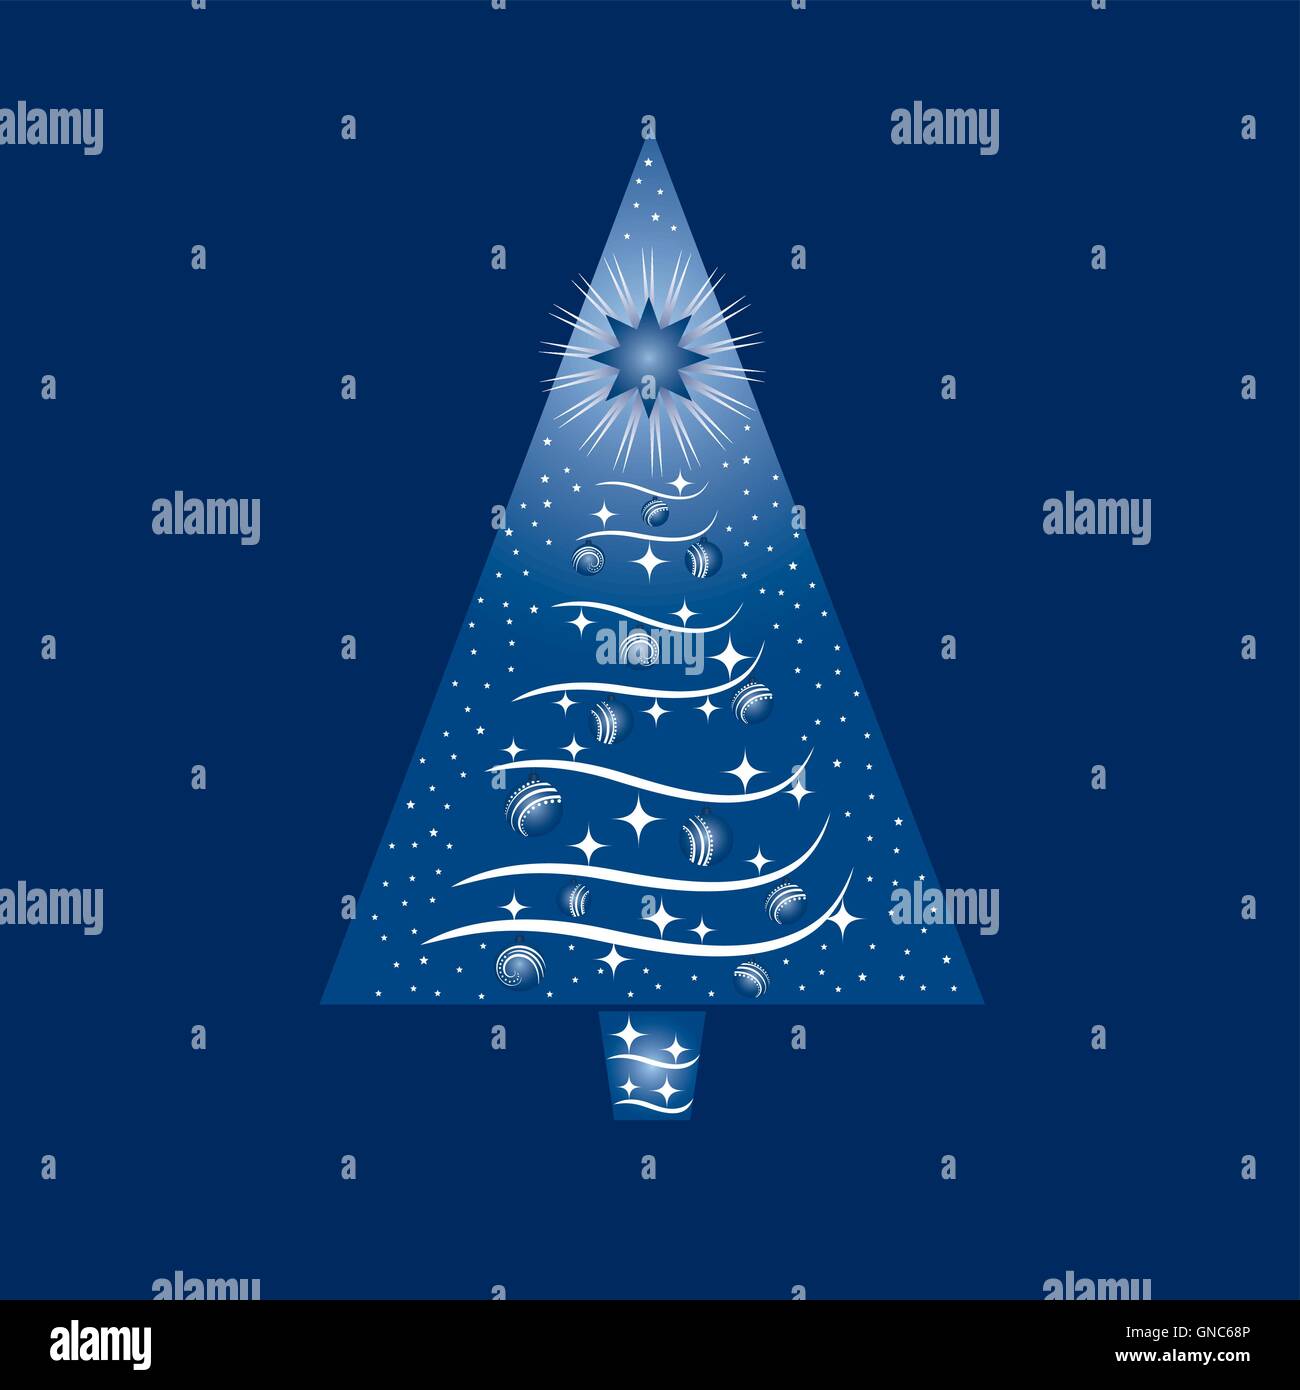 Navy christmas Stock Vector Images - Alamy